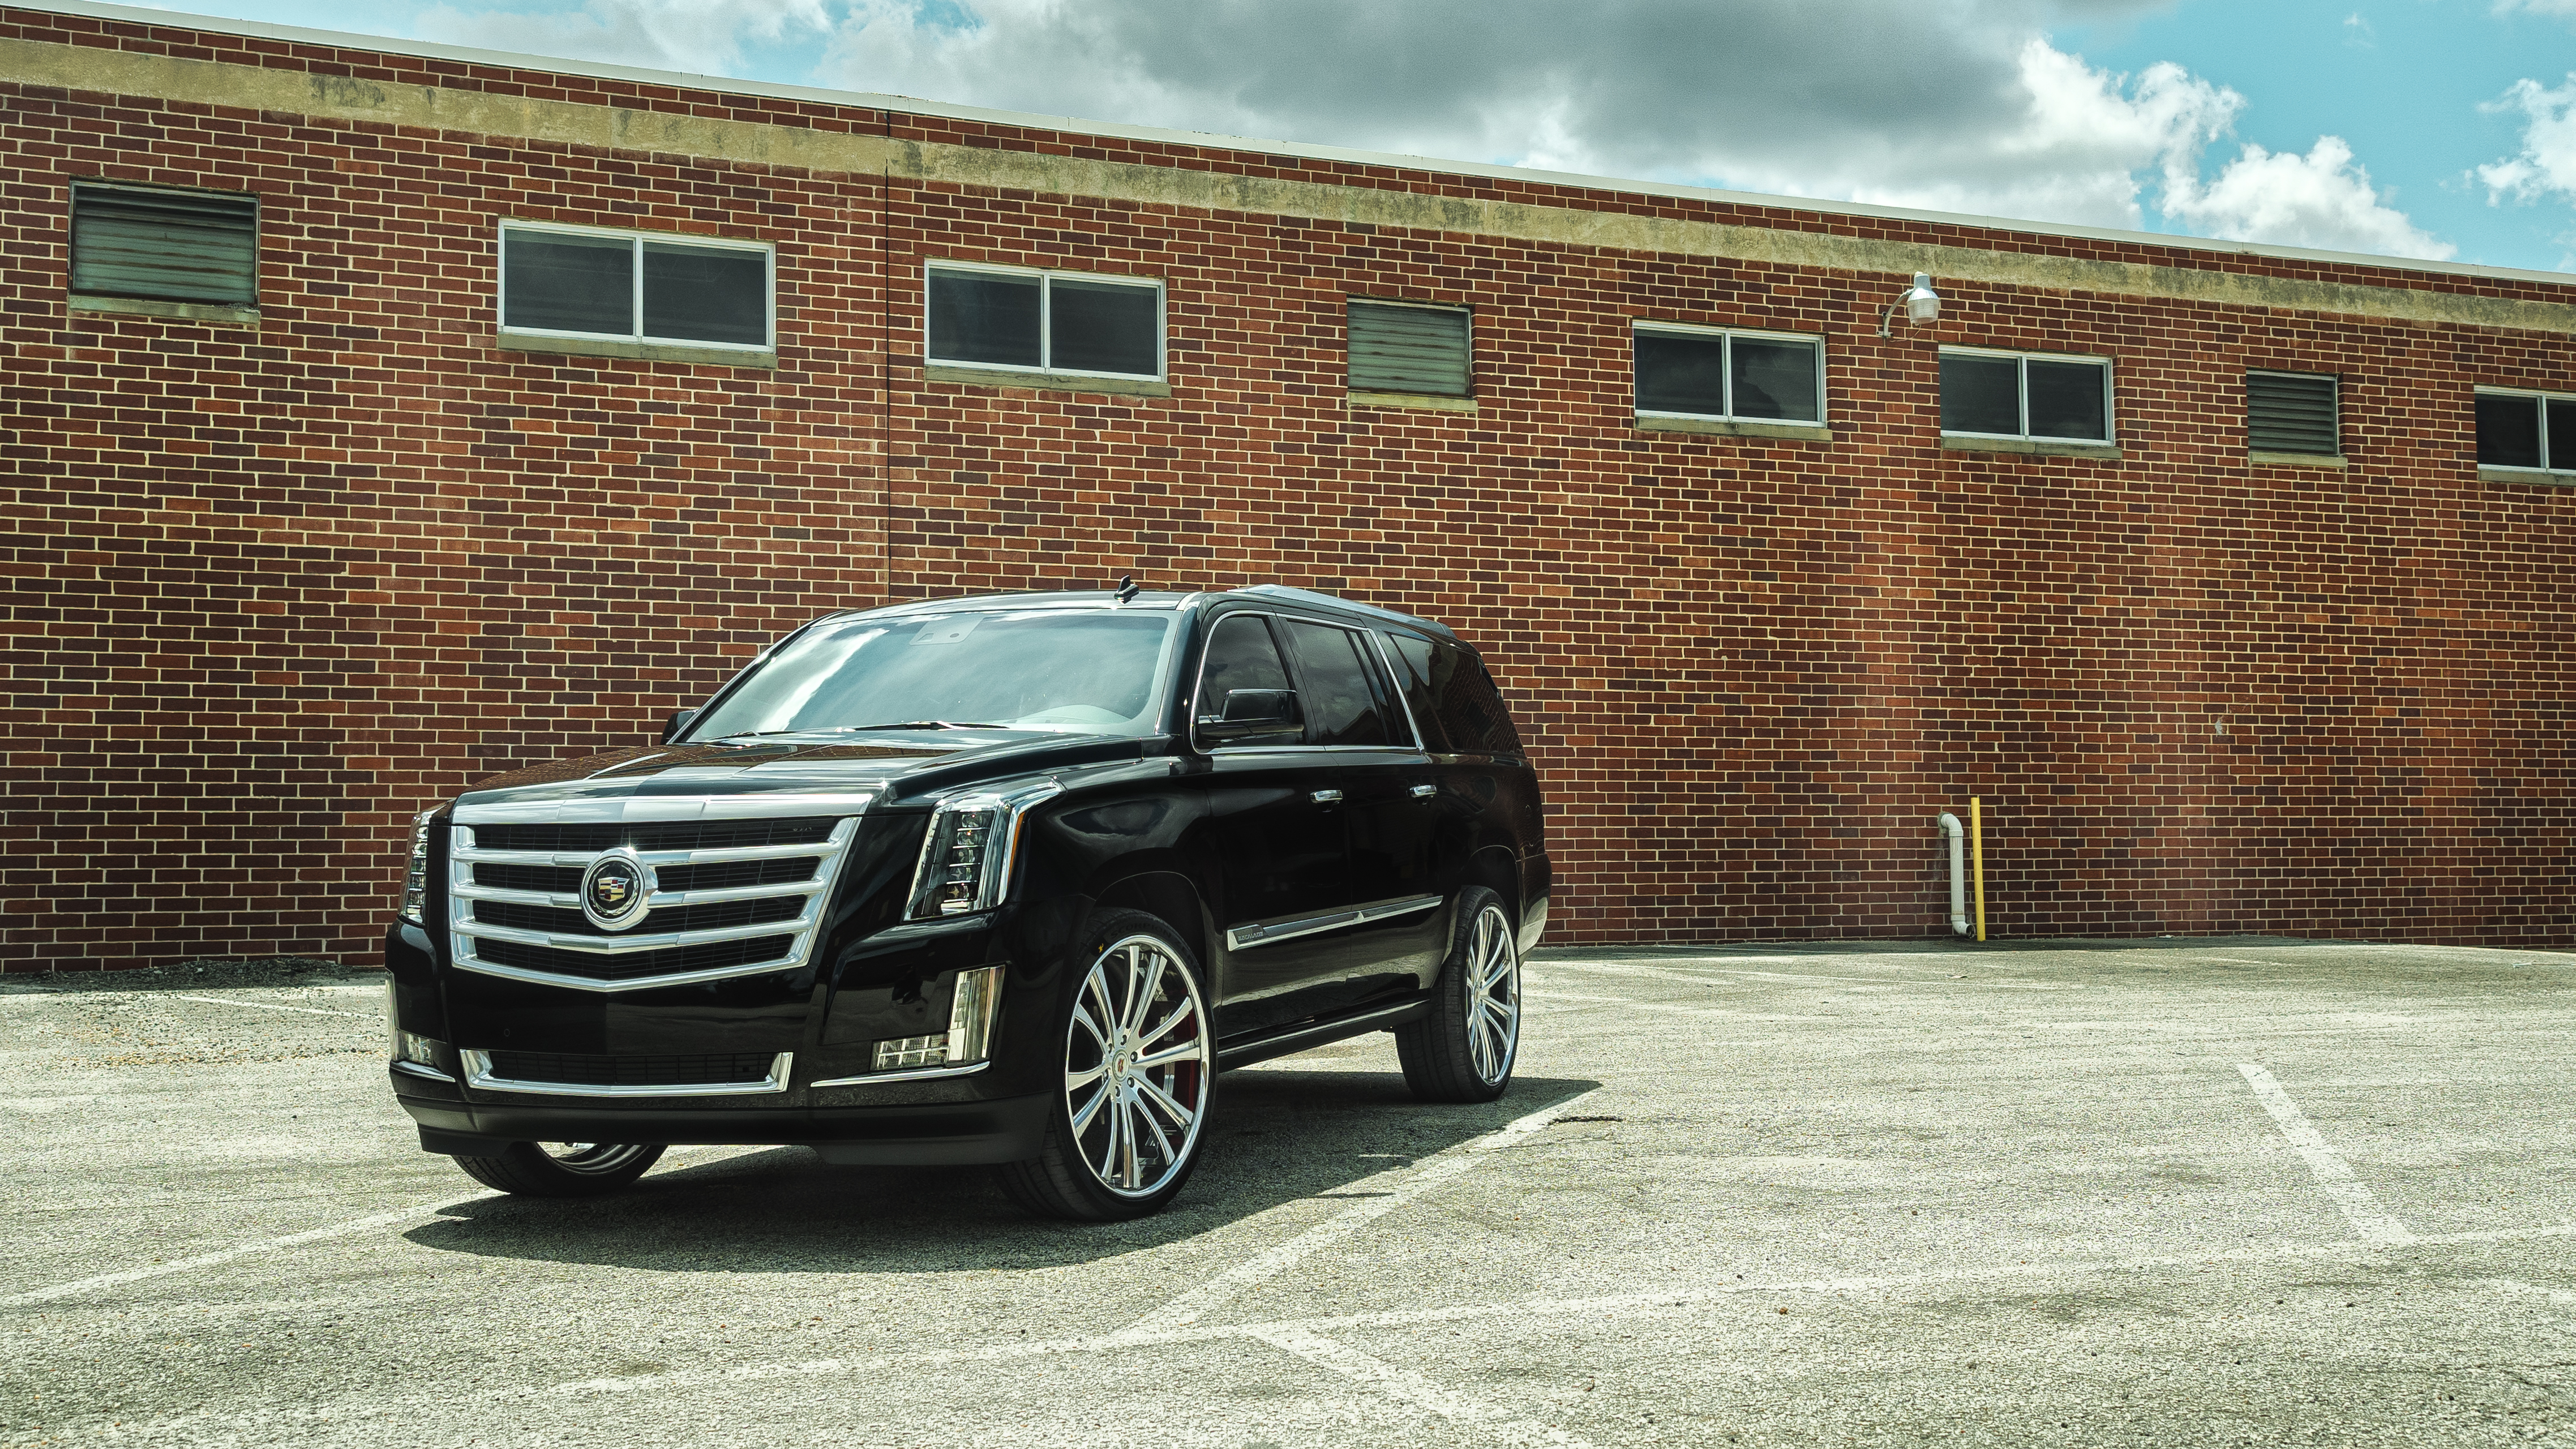 android cadillac, cars, black, side view, escalade